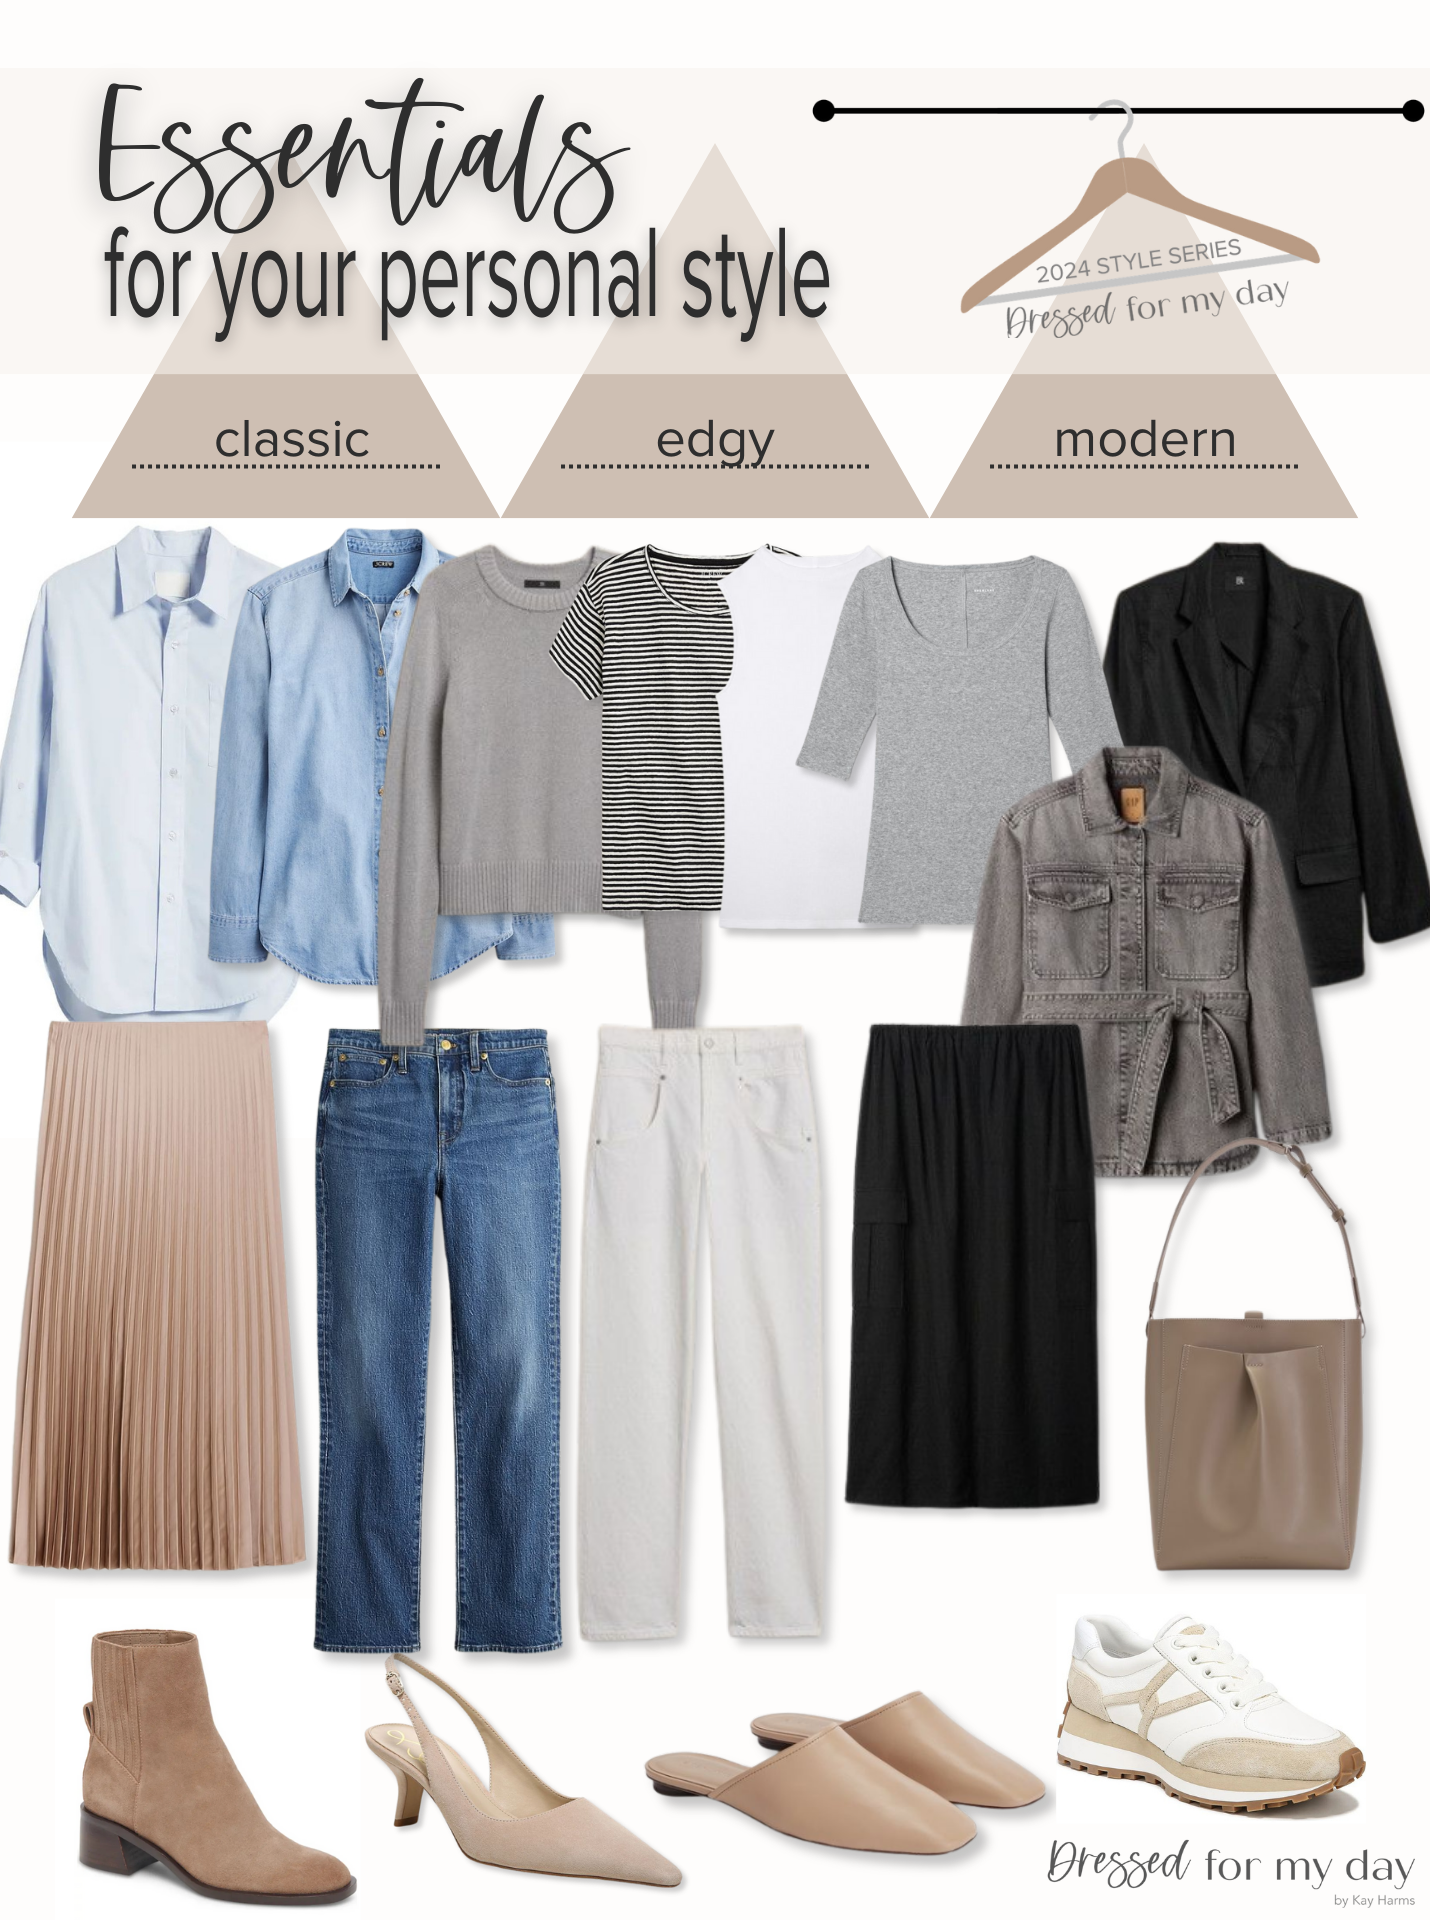 Wardrobe Essentials for Your Personal Style - Dressed for My Day